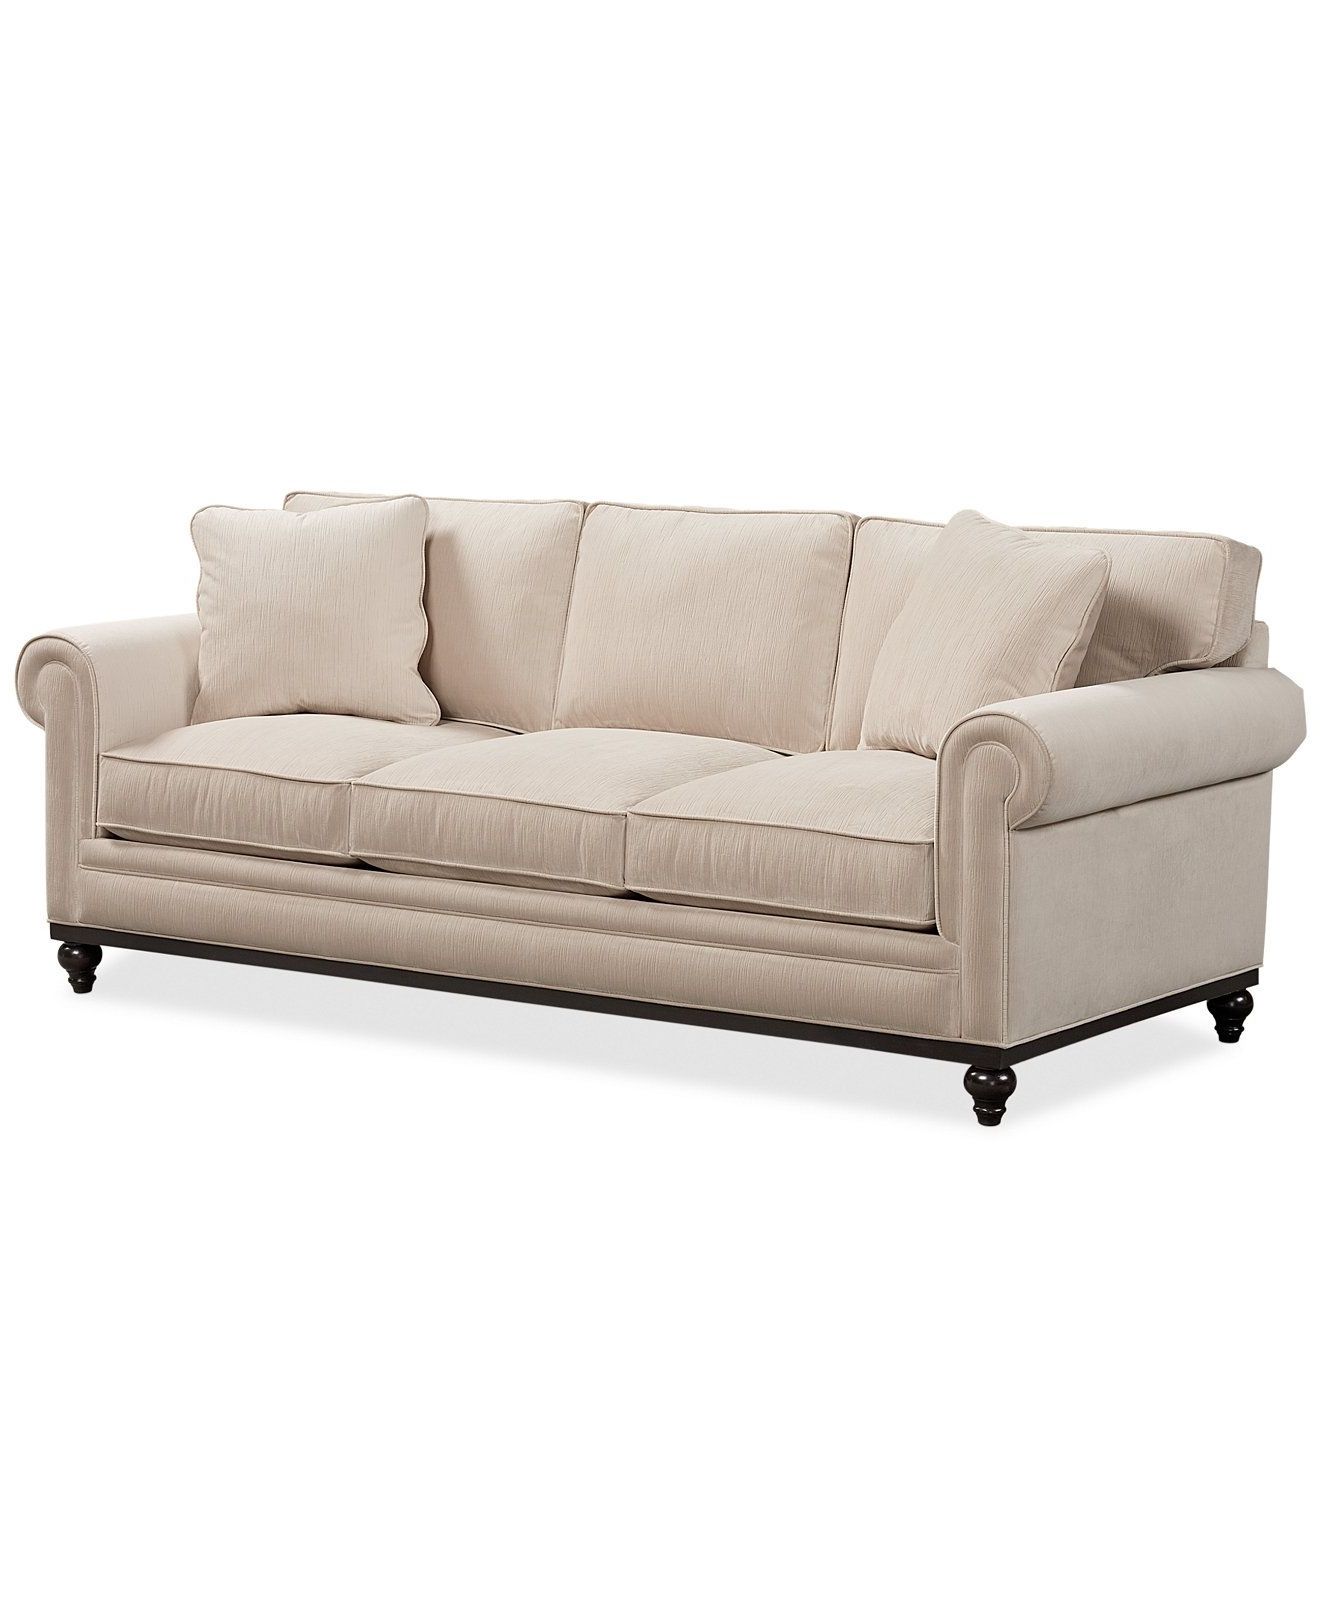 Martha Stewart Collection New Club Fabric Roll Arm Sofa – Couches Throughout Famous Macys Sofas (View 15 of 15)